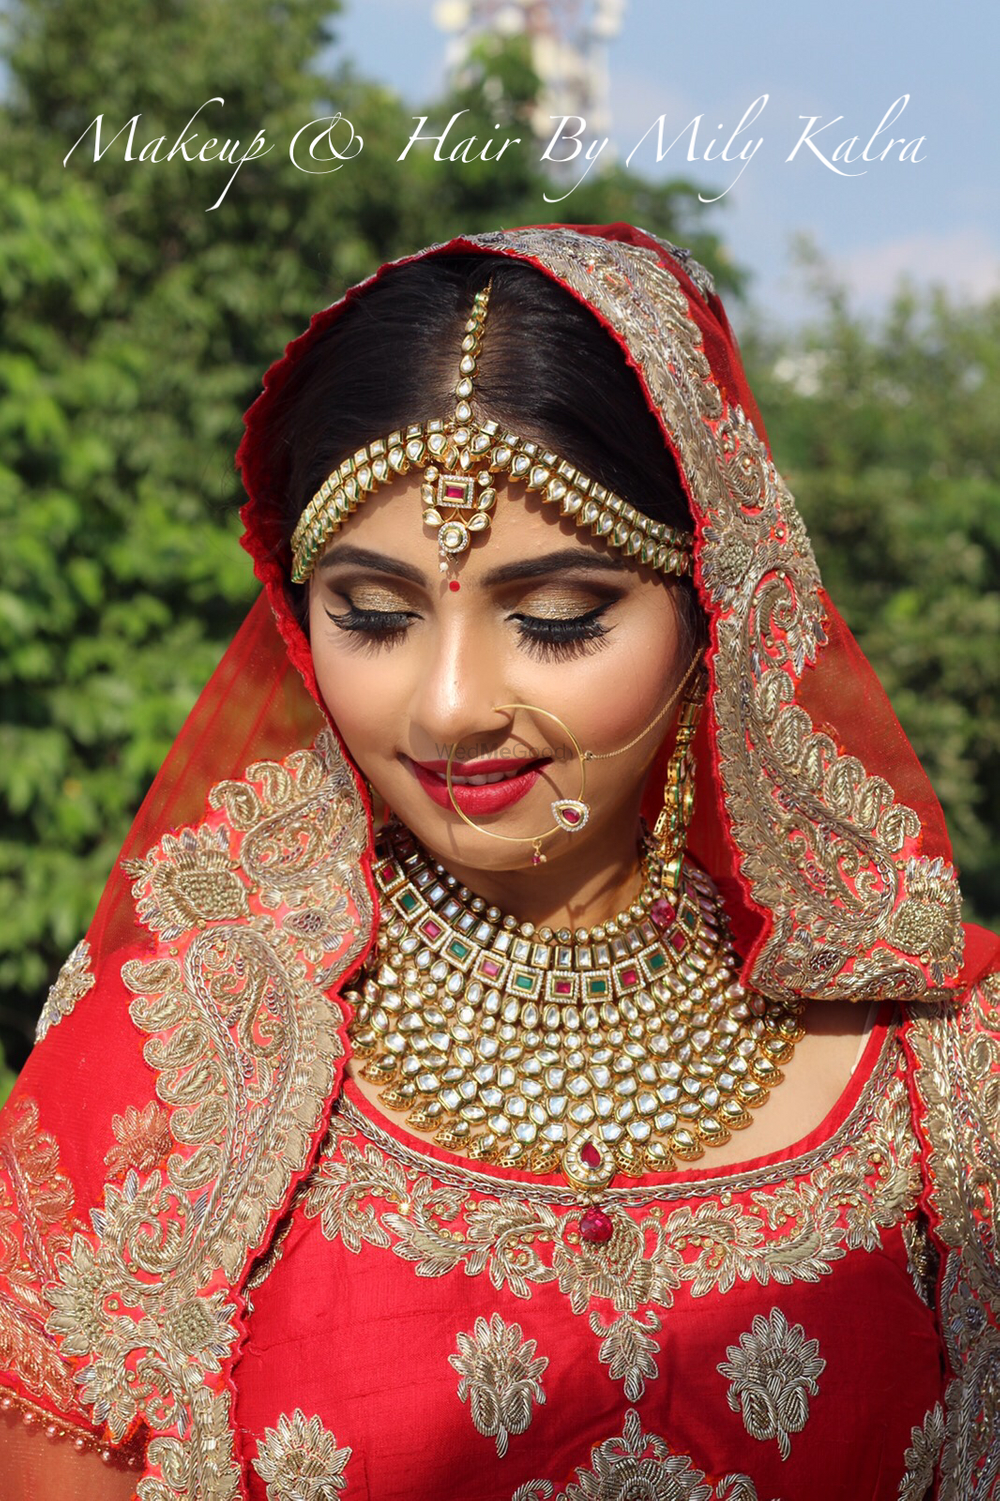 Photo From The Classic Bride - By Makeup By Mily Kalra